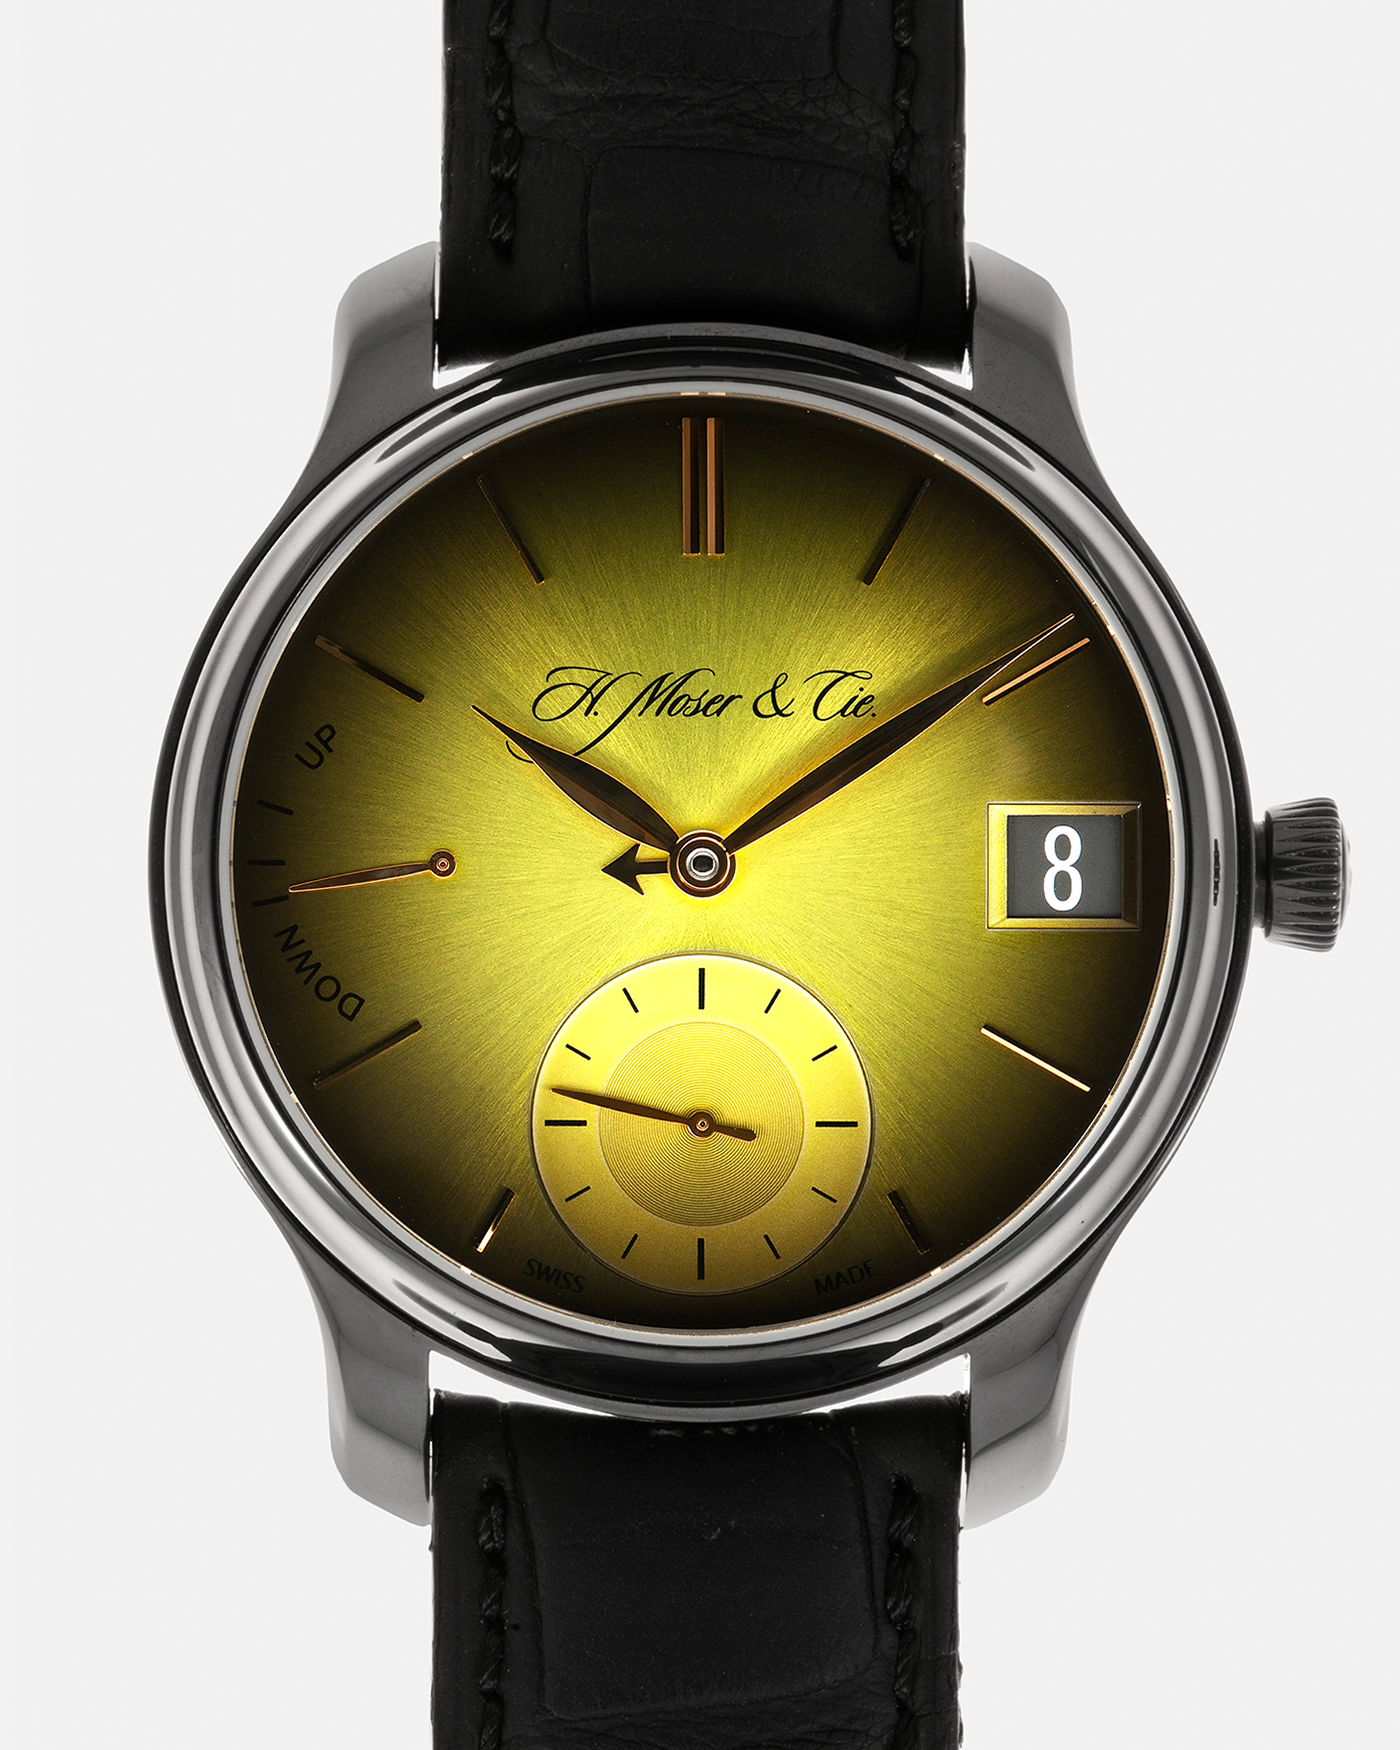 Brand: H.Moser & Cie Year: 2020 Model: Endeavour Perpetual Calendar Yellow-Green Fumé Reference Number: 1344-0504 Material: DLC Coated Titanium Movement: H. Moser Cal. HMC 341, Manual-Winding Case Diameter: 40.8mm Lug Width: 20mm Strap: H. Moser & Cie Black Alligator Leather Strap with Signed DLC Coated Titanium Tang Buckle